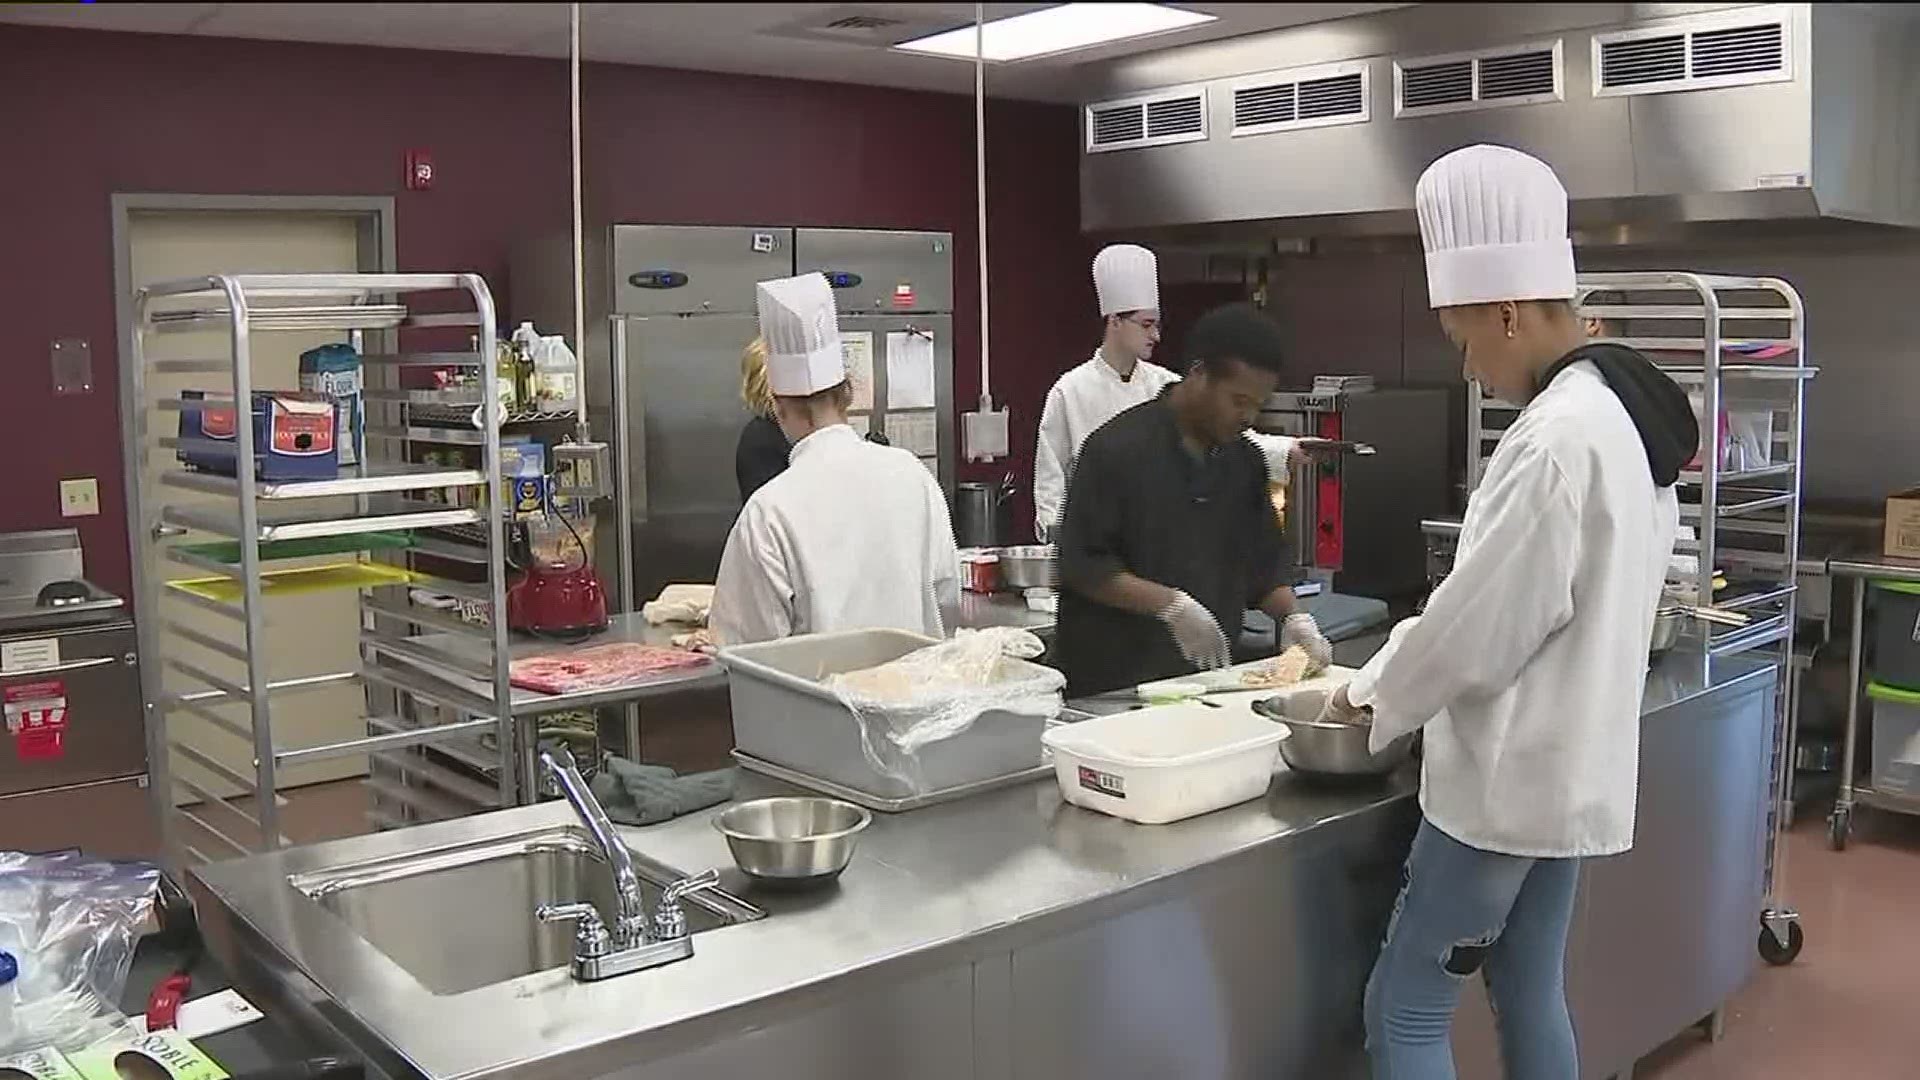 A local chef teamed up with culinary students to prepare a meal at the Central Pennsylvania Food Bank.